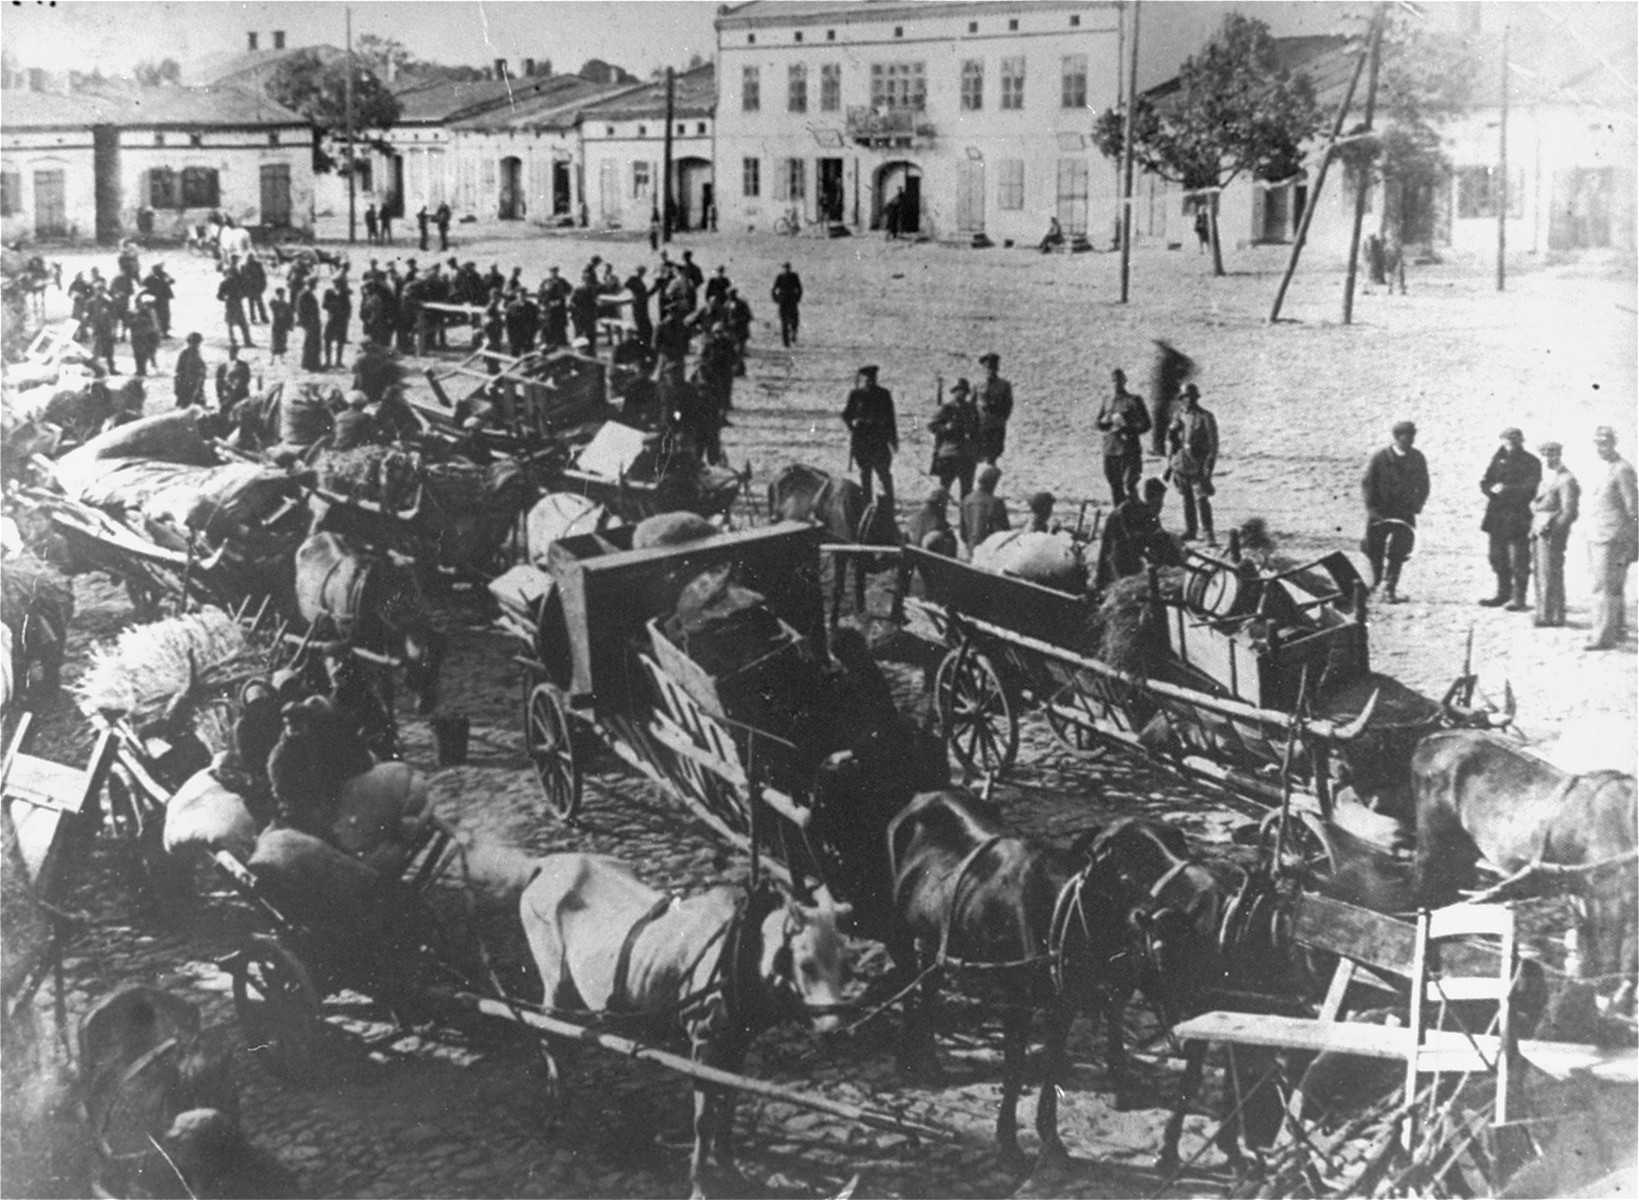 German troops stand in the town sqaure of Przyrow where dozens of horse-drawn wagons are gathered [presumably during a resettlement action].  [oversized print]